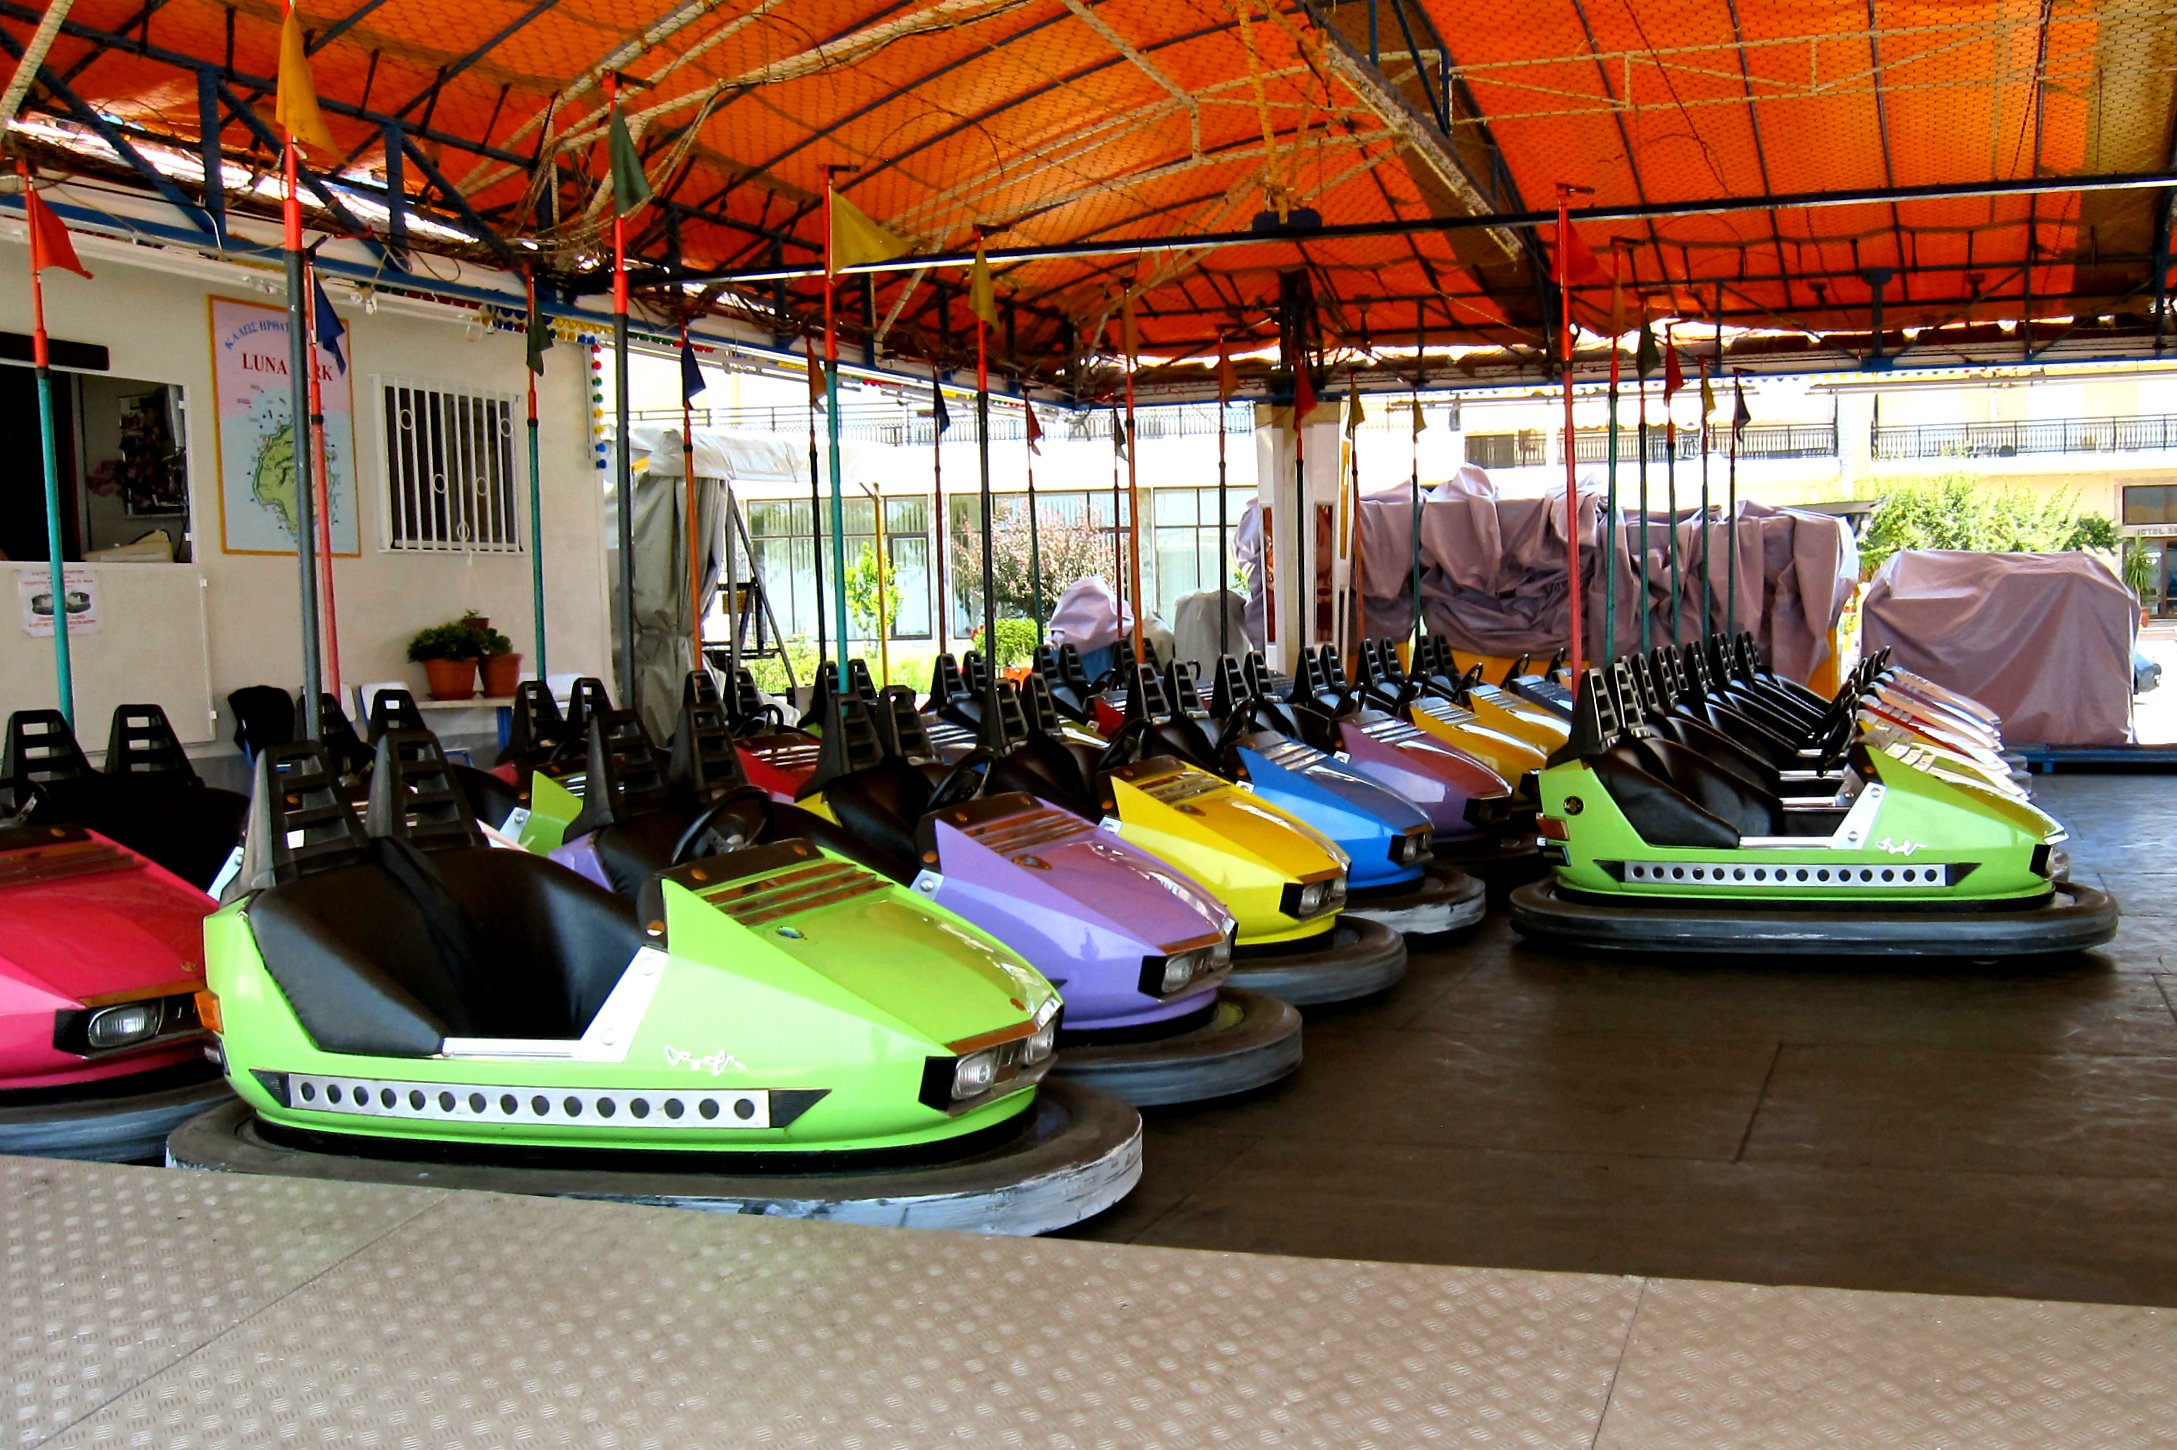 Flickr - ronsaunders47 - The ideal city commuting vehicle. The dodgem car.